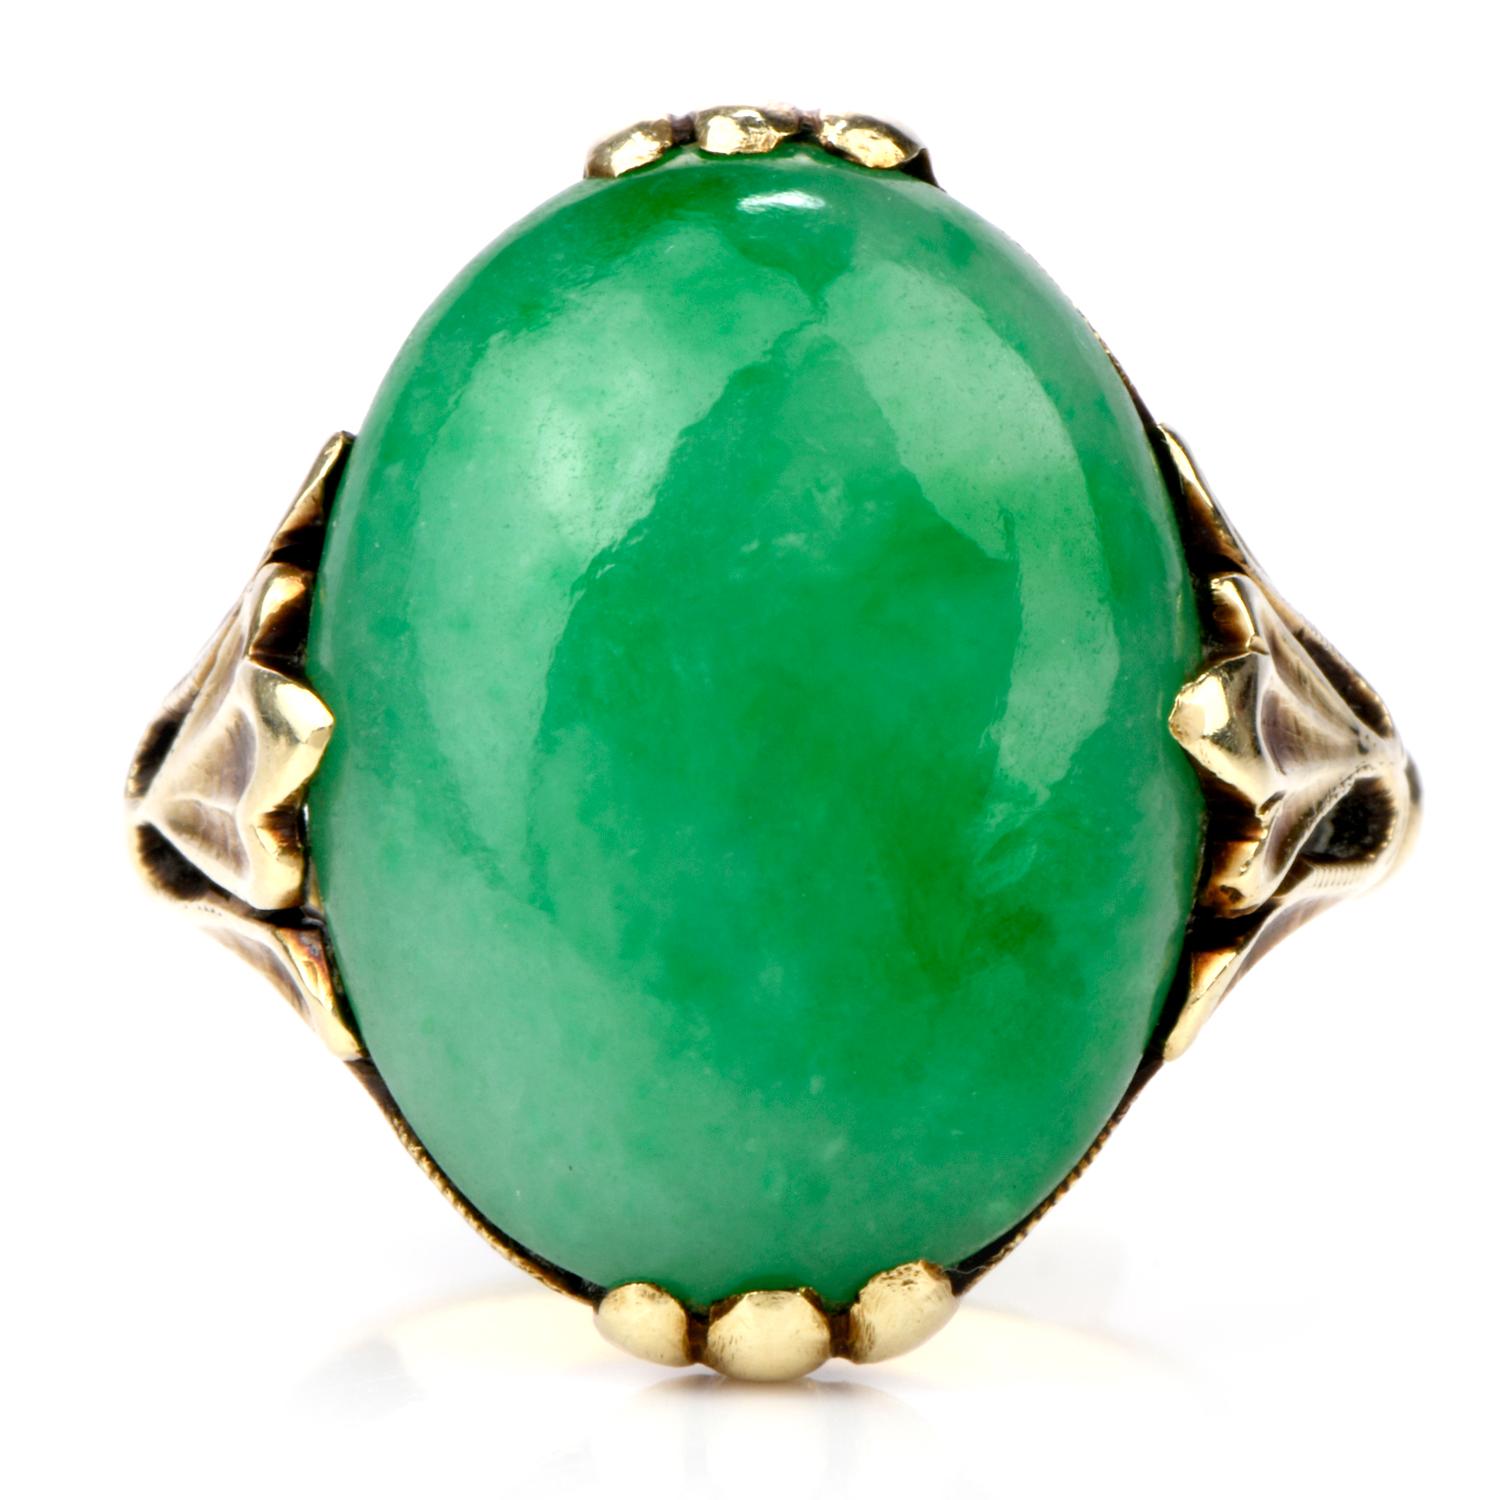 This beautiful Jadeite RIng was inspired in a floral motif

and crafed in 14K yellow gold.

Adorning the center of this ring is a large oval shaped

GIA certified Jadeite measuirng 17.80 x 13.10 x 6.93mm deep

which is secured into the ring by the